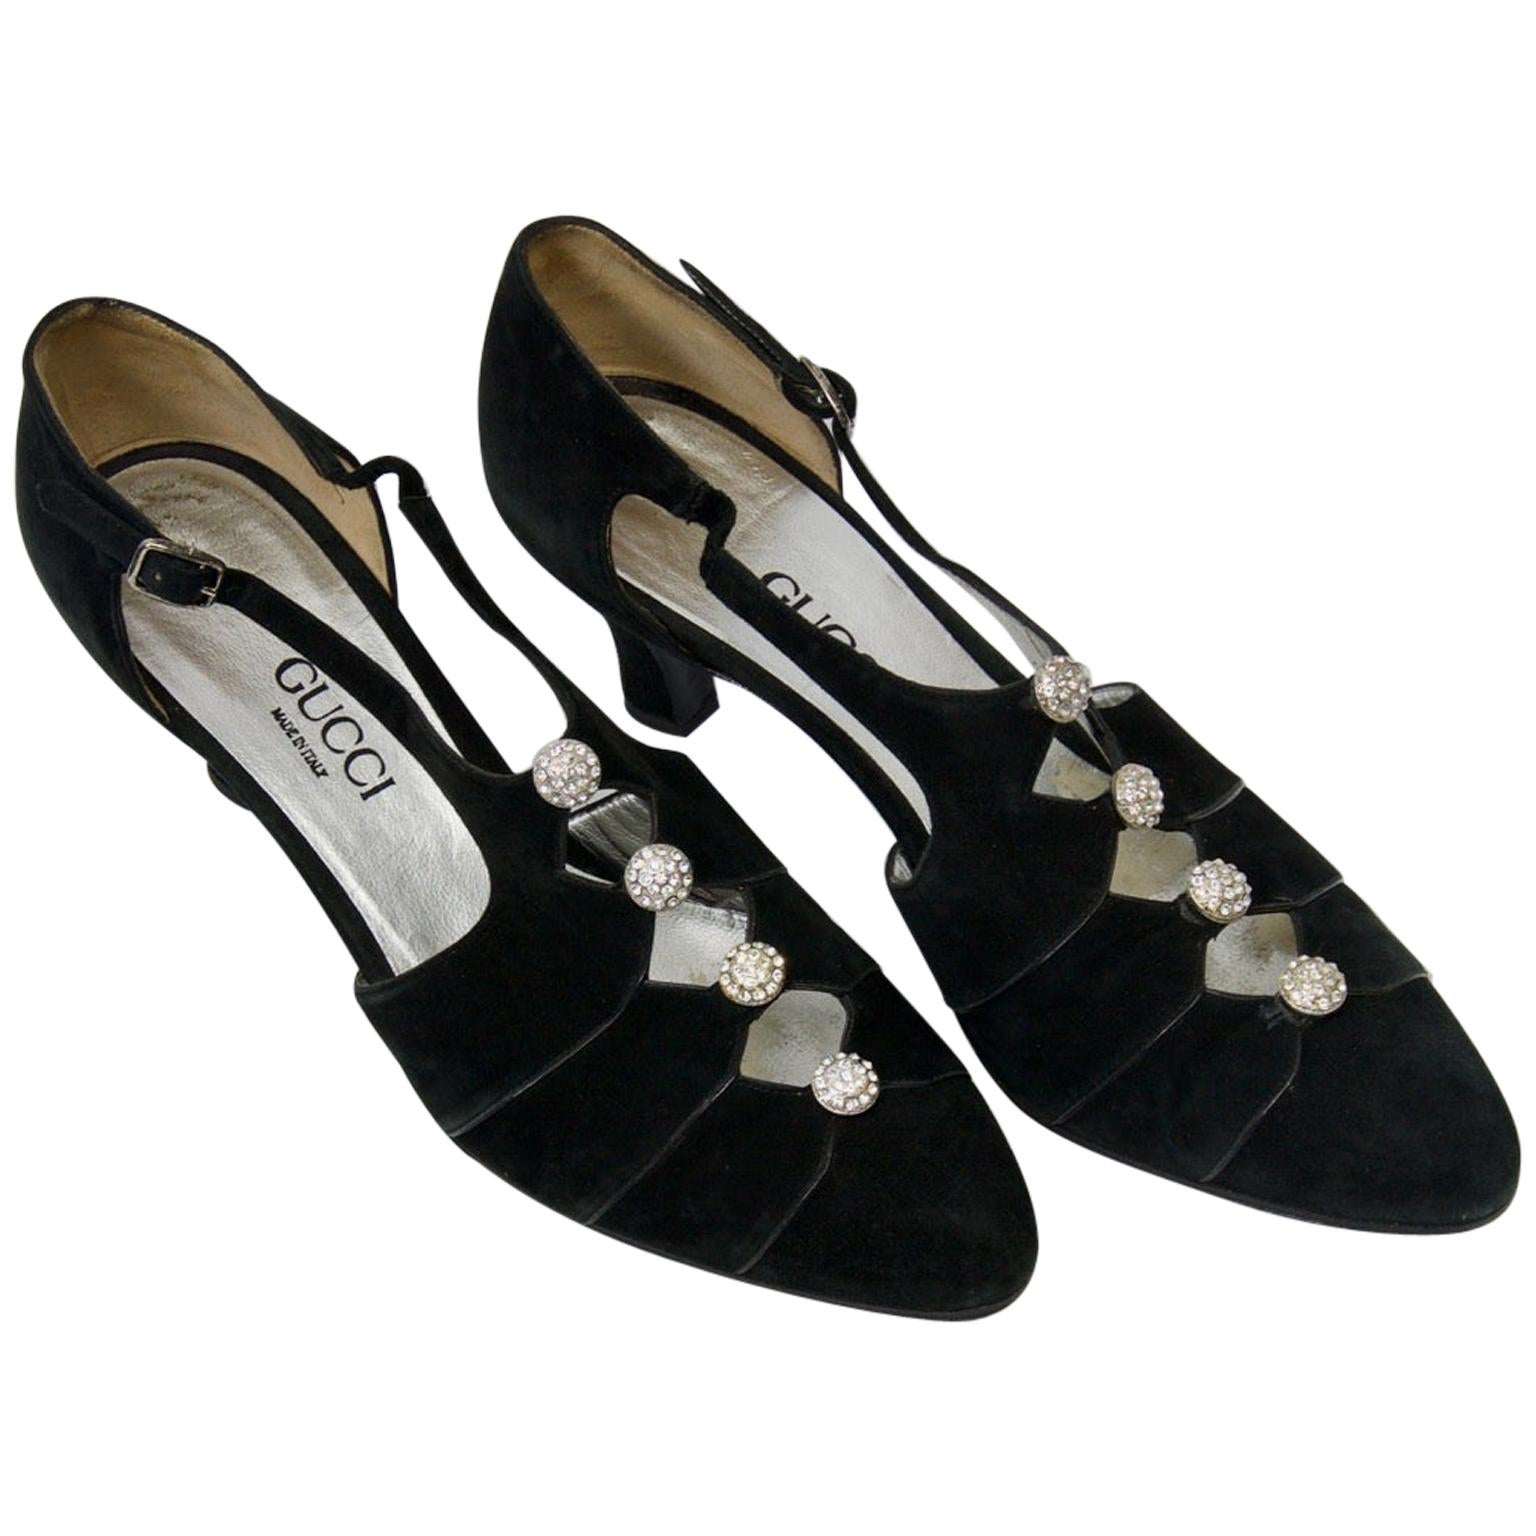 Gucci Black Suede Shoes with Rhinestone Accents